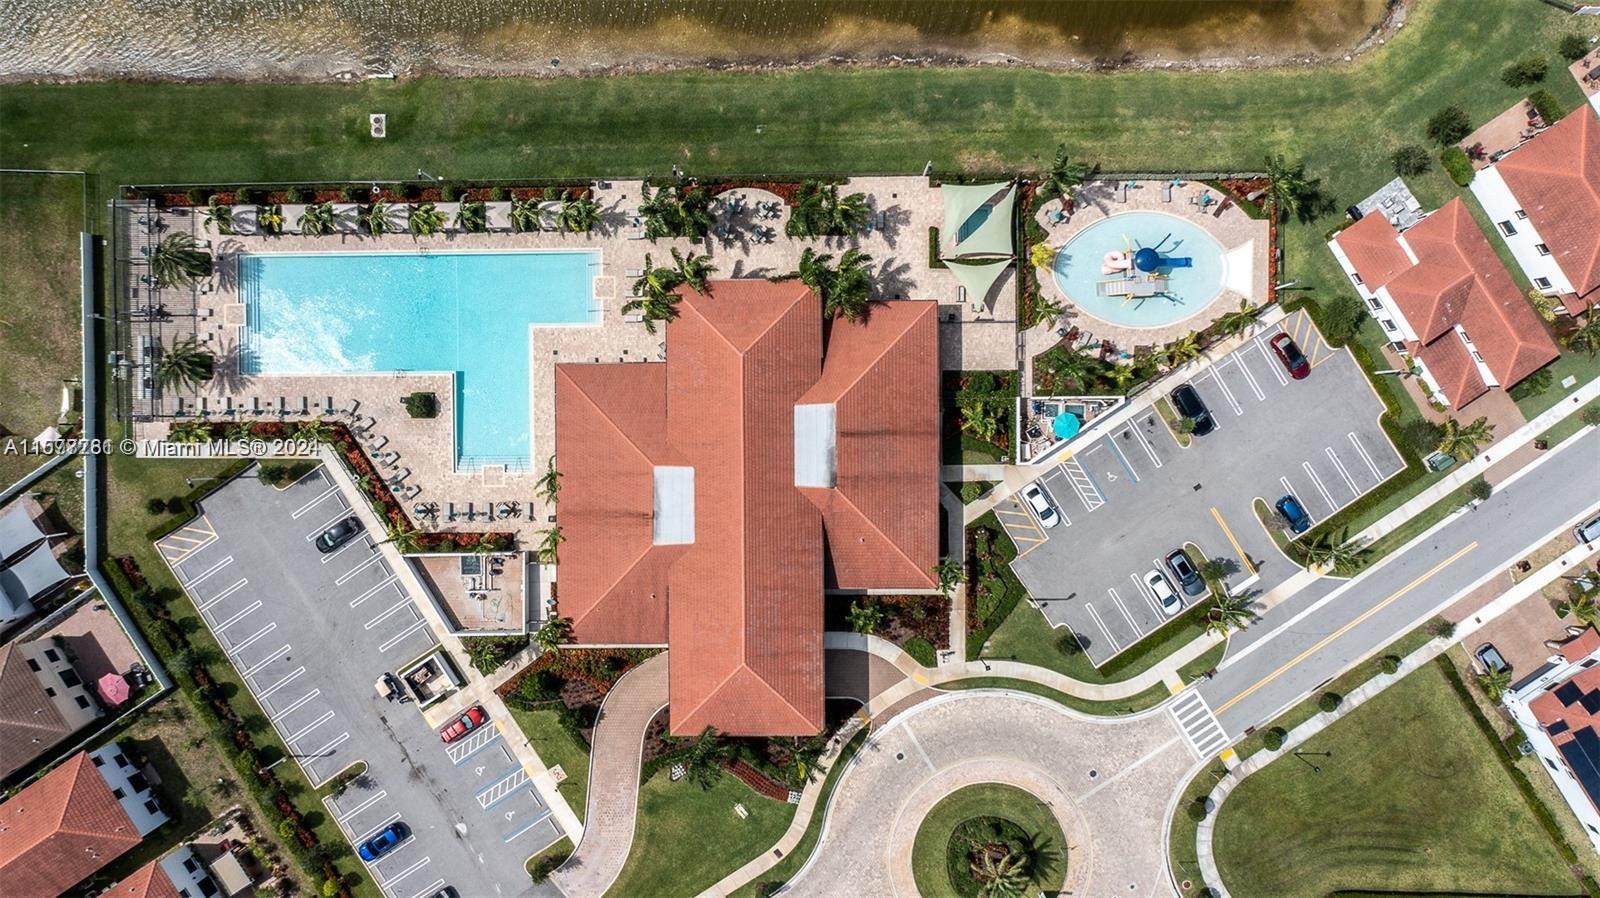 an aerial view of a house with a swimming pool patio and outdoor seating